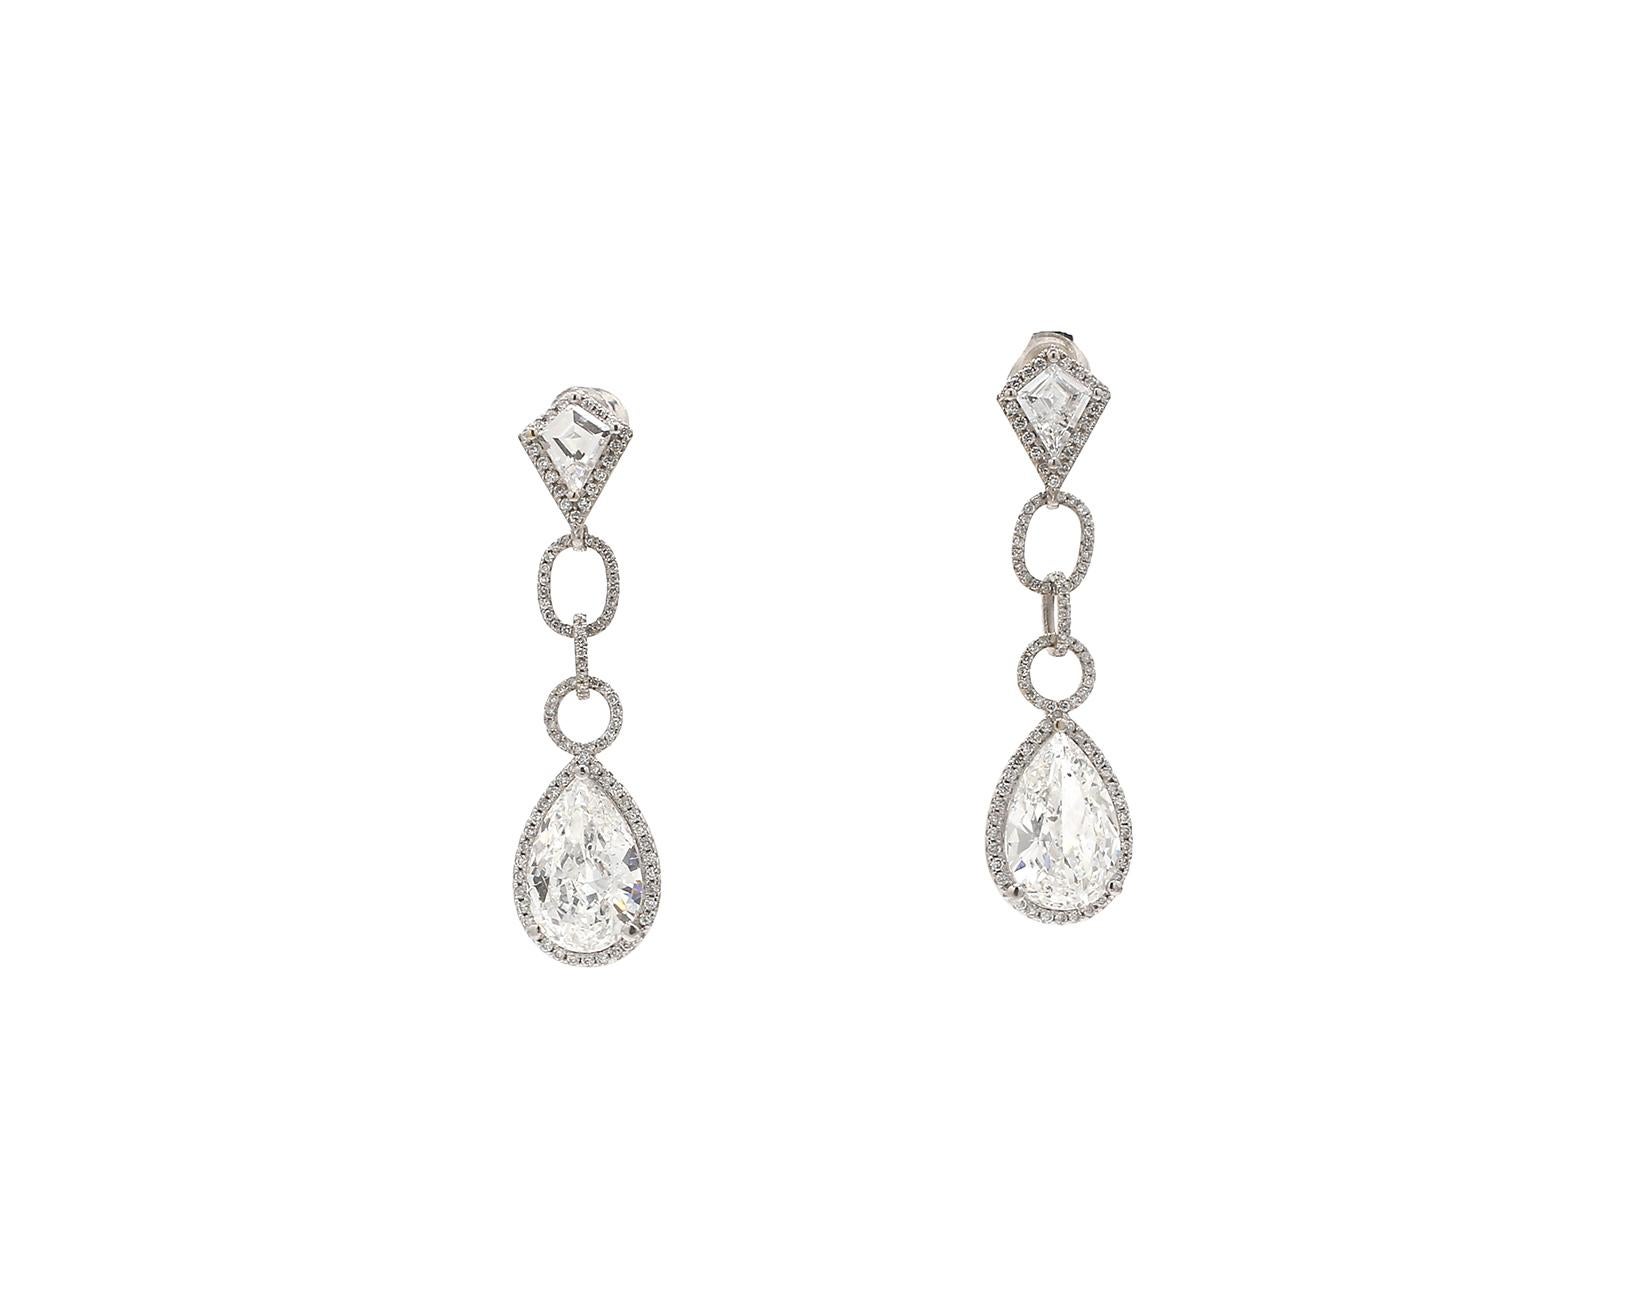 Halo Dangling Earrings in 18K White Gold with Pave Set Rounds Around Kite Shapes and GIA Certified E-F/SI1 Pear Shape Natural Diamond Centers.  D7.40ct.t.w.  (Pear Shape Centers - 6.19ct.t.w.) 
